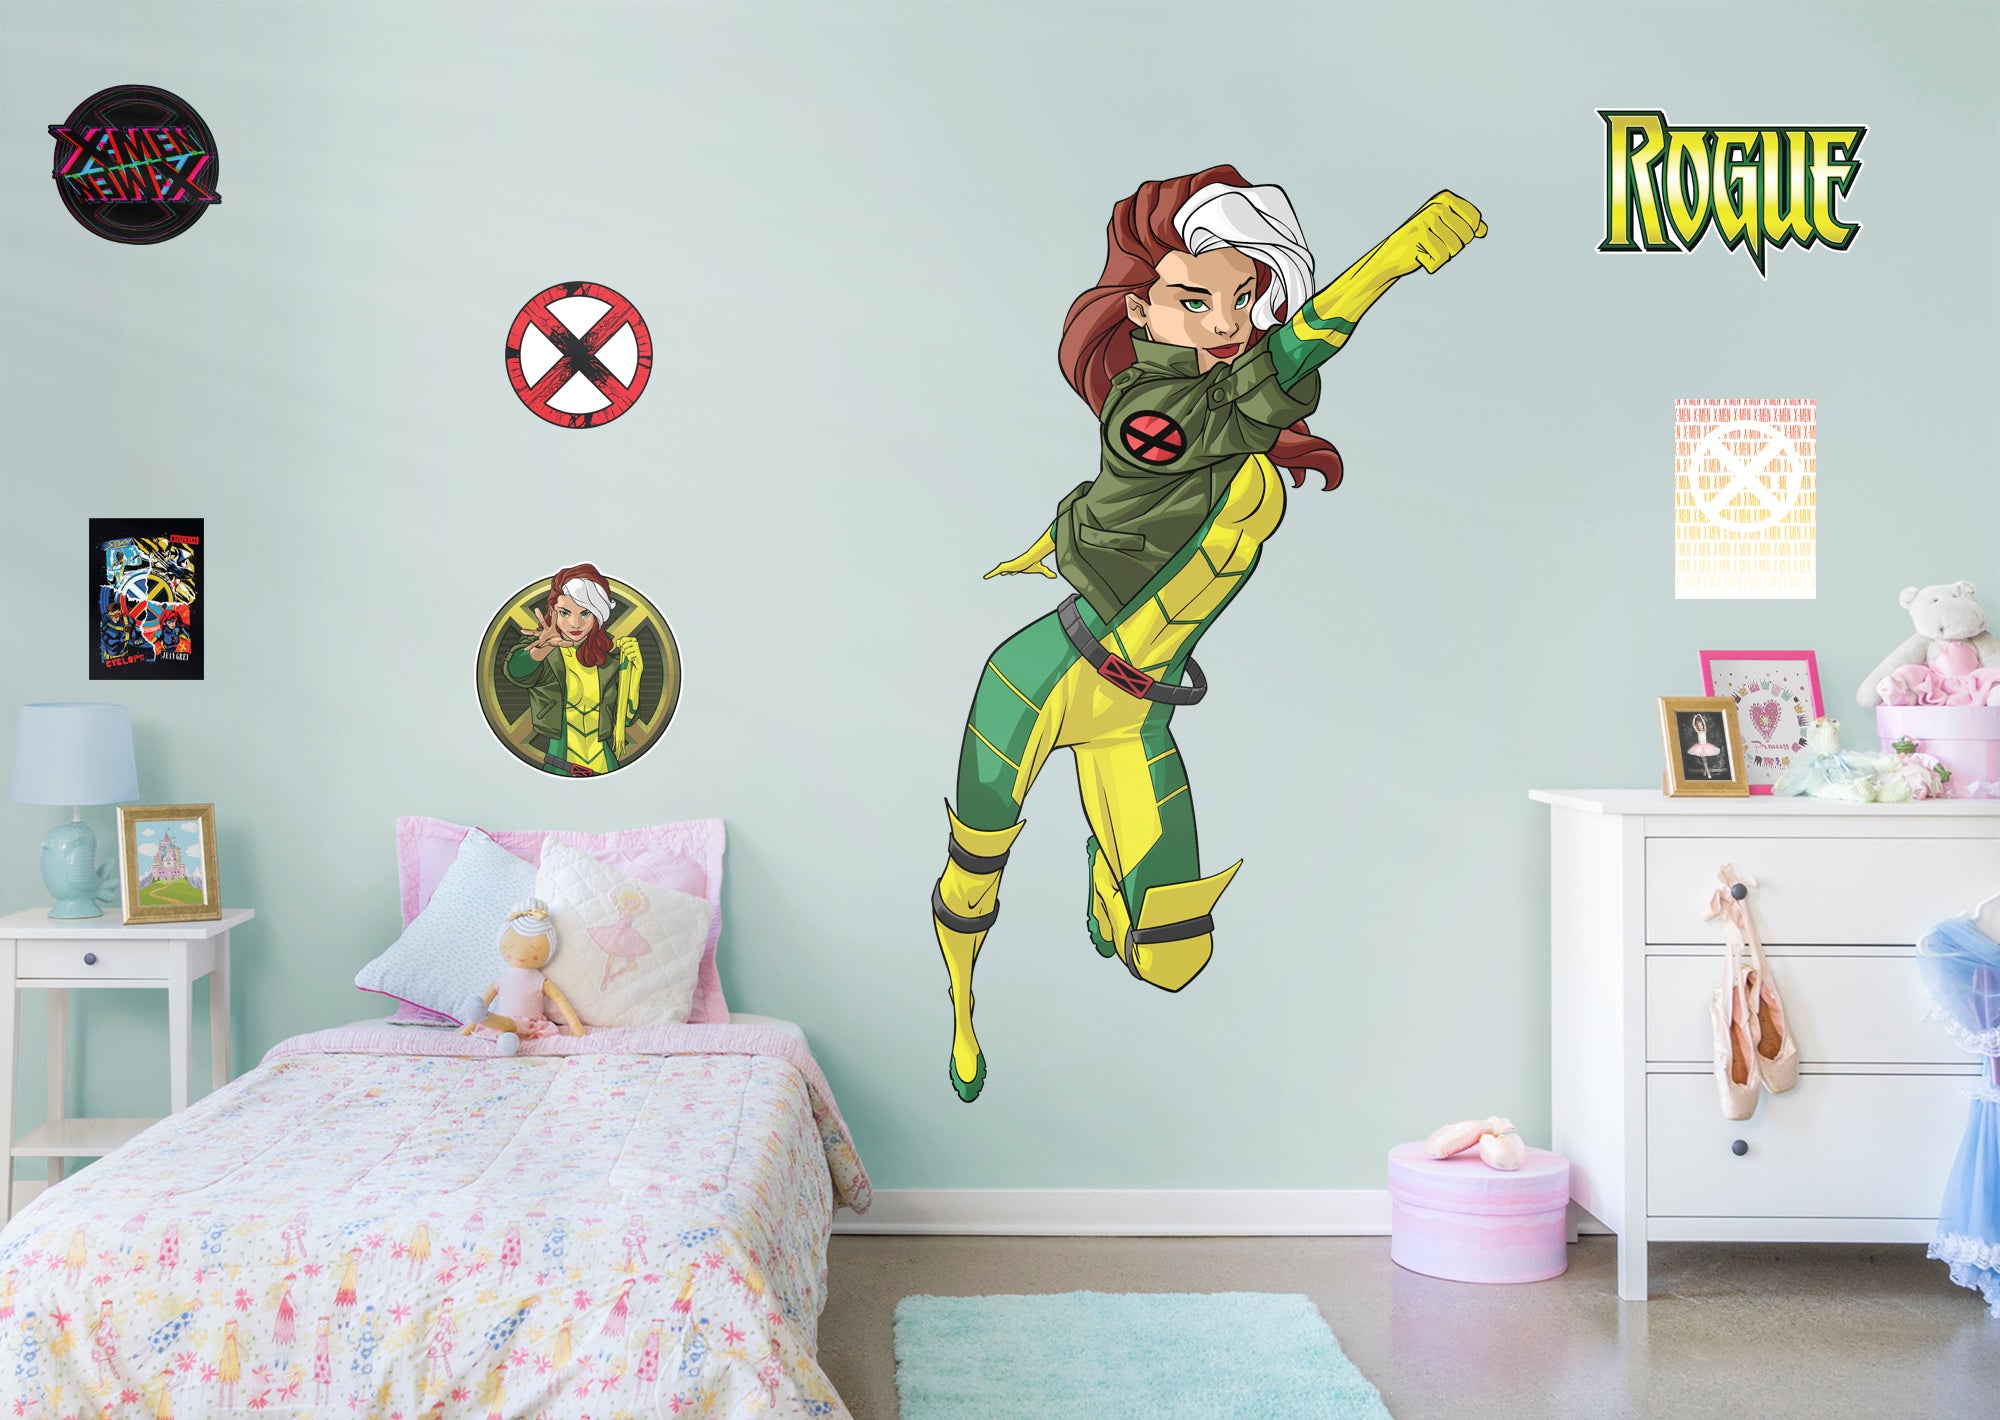 X-Men Rogue RealBig - Officially Licensed Marvel Removable Wall Decal Life-Size Character + 6 Decals (46"W x 78"H) by Fathead |